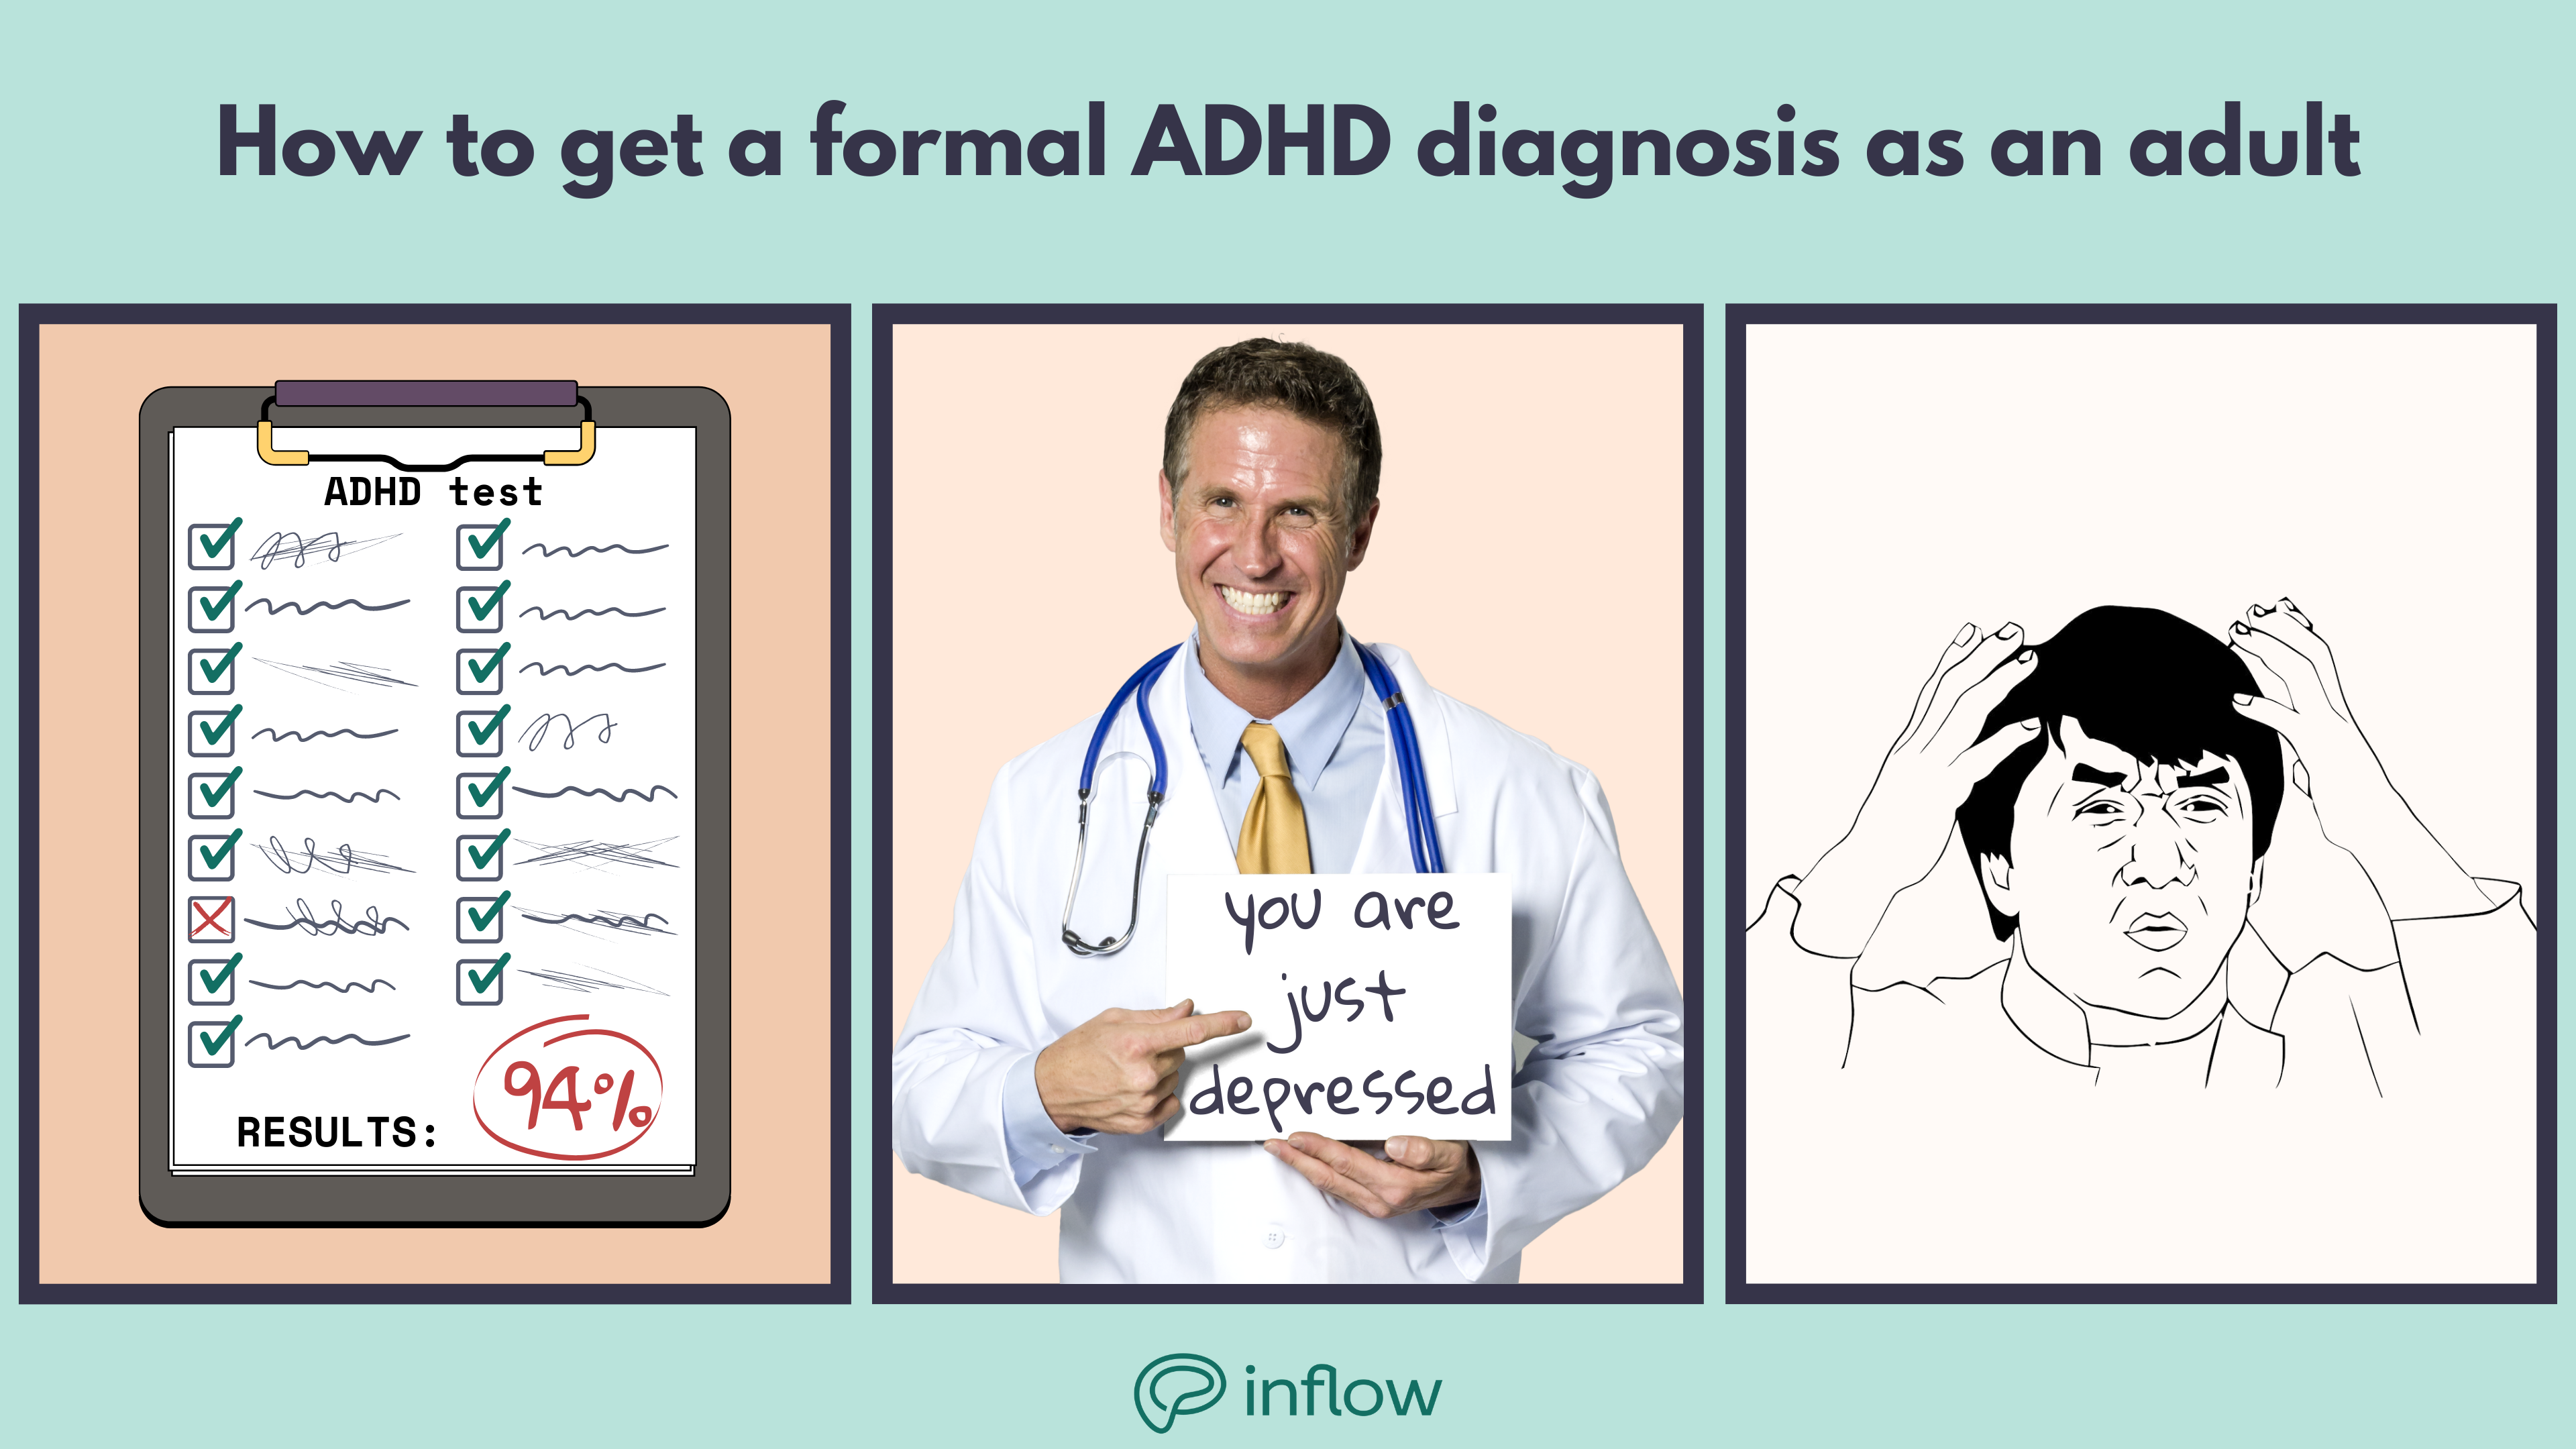 3 panel meme. title: how to get a formal adhd diagnosis as an adult. panel 1 shows a clipboard with a sheet titled "adhd test". all but one boxes are checked and the results show "94%" in red. 2nd panel: a doctor smiling and holding a sign that reads, "you are just depressed". the third panel is the jackie chan "wtf" meme